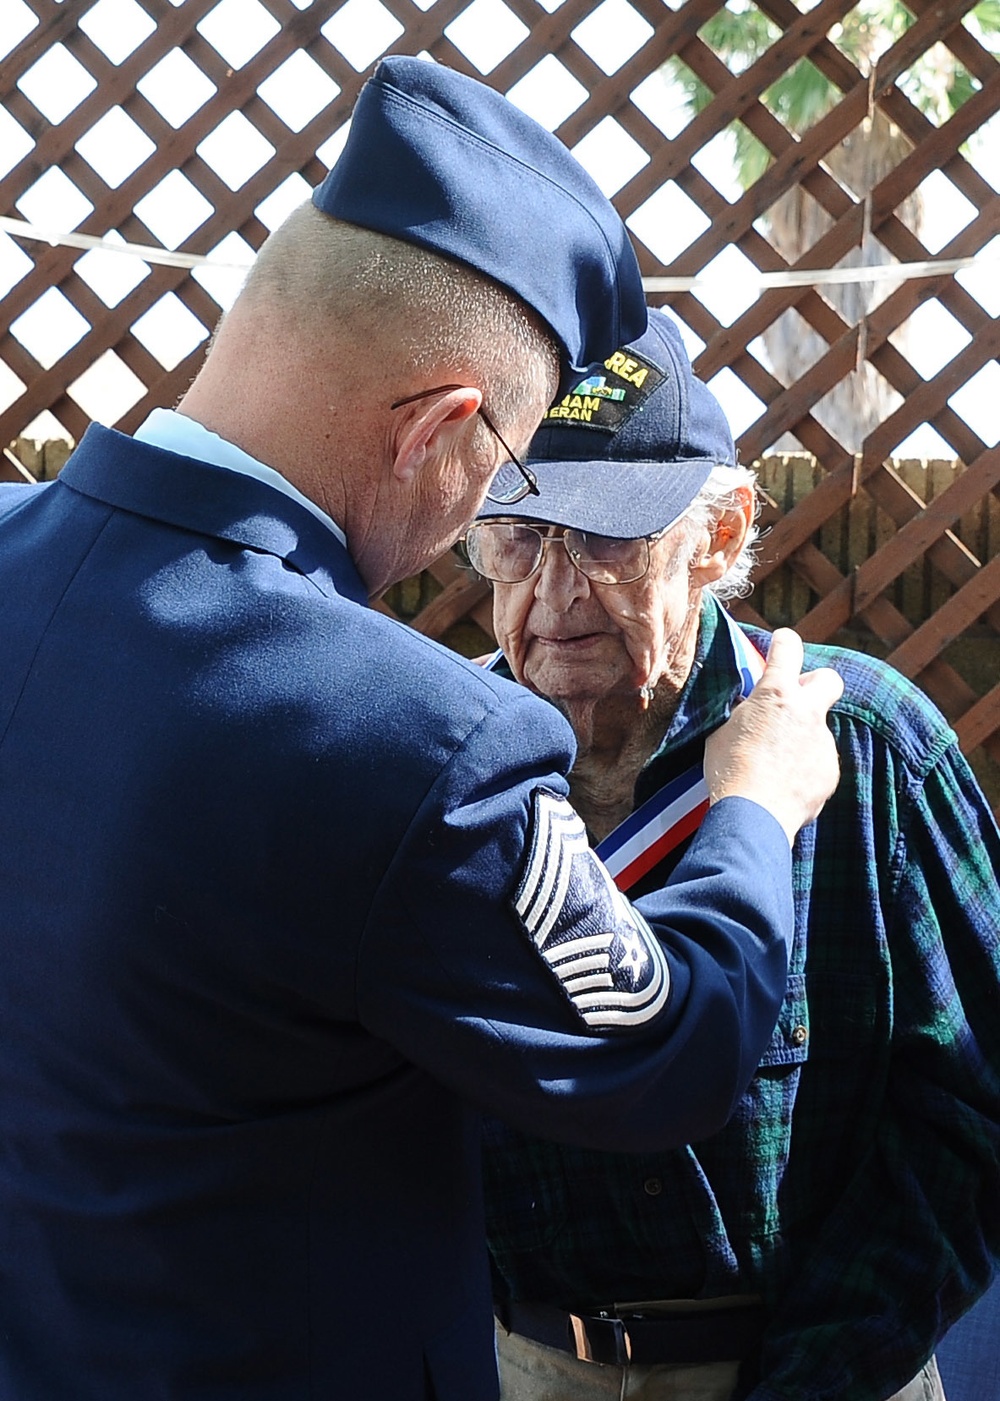 Medallion of Recognition for three-time war veteran